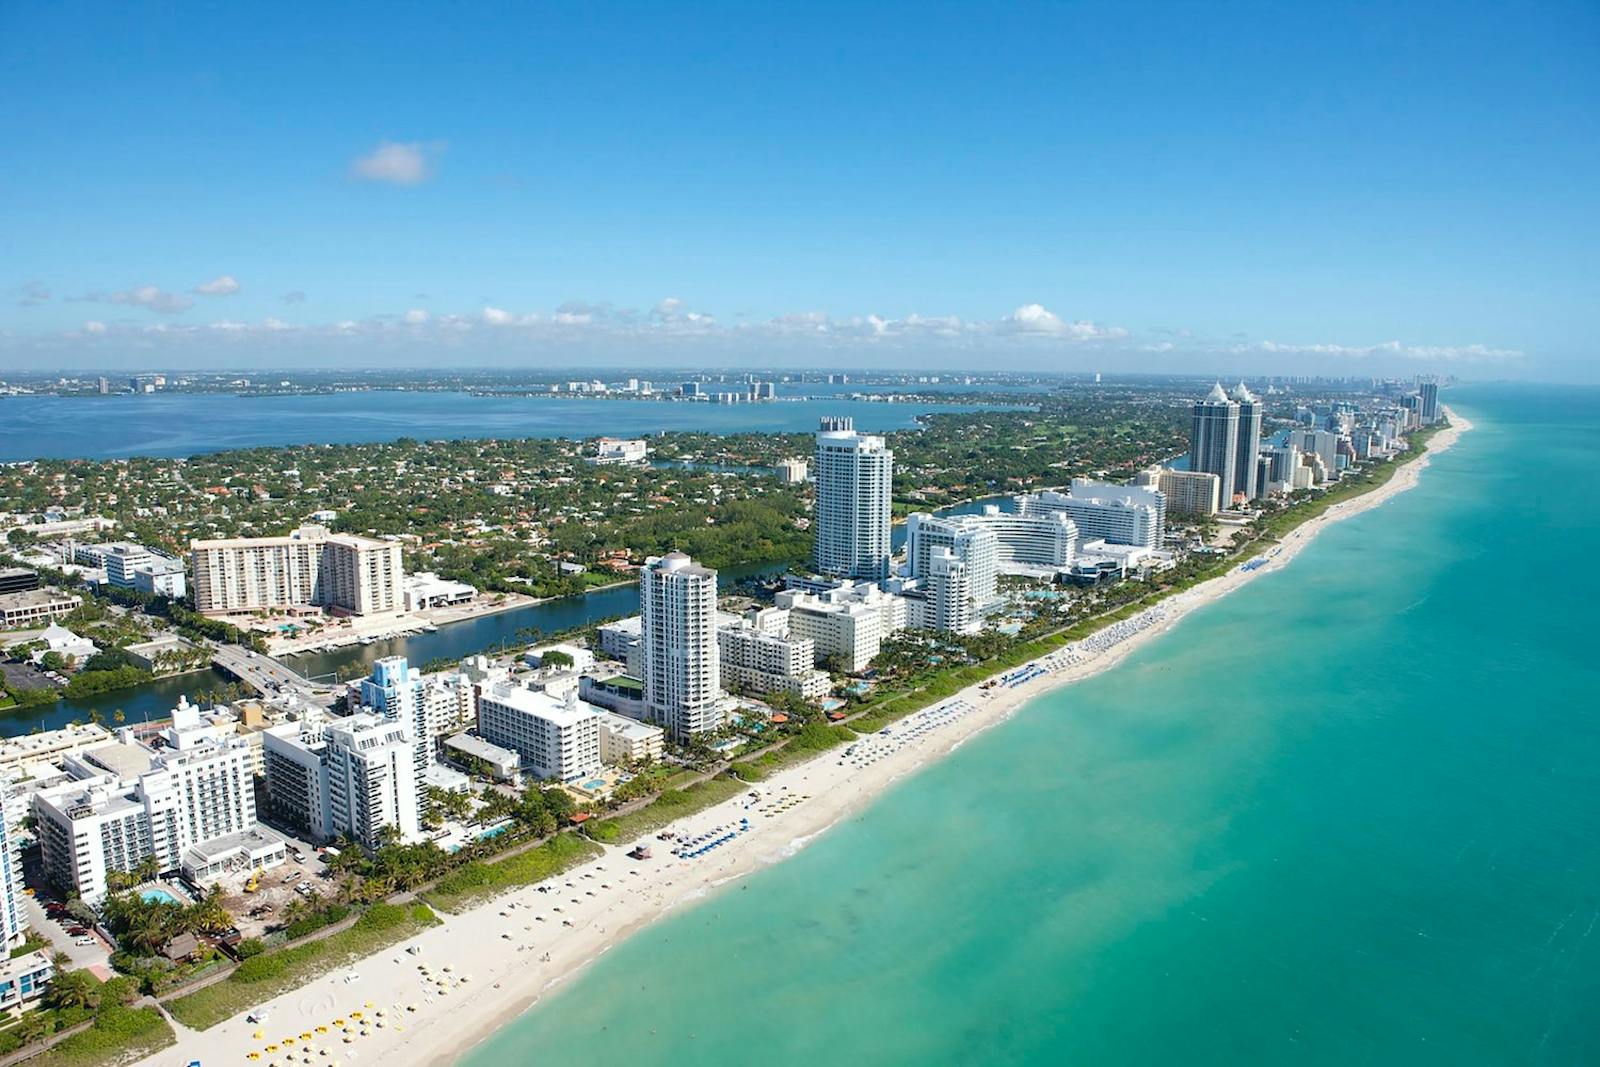 Your Trip to Miami: The Only Guide You Need written by Sadie Brooks